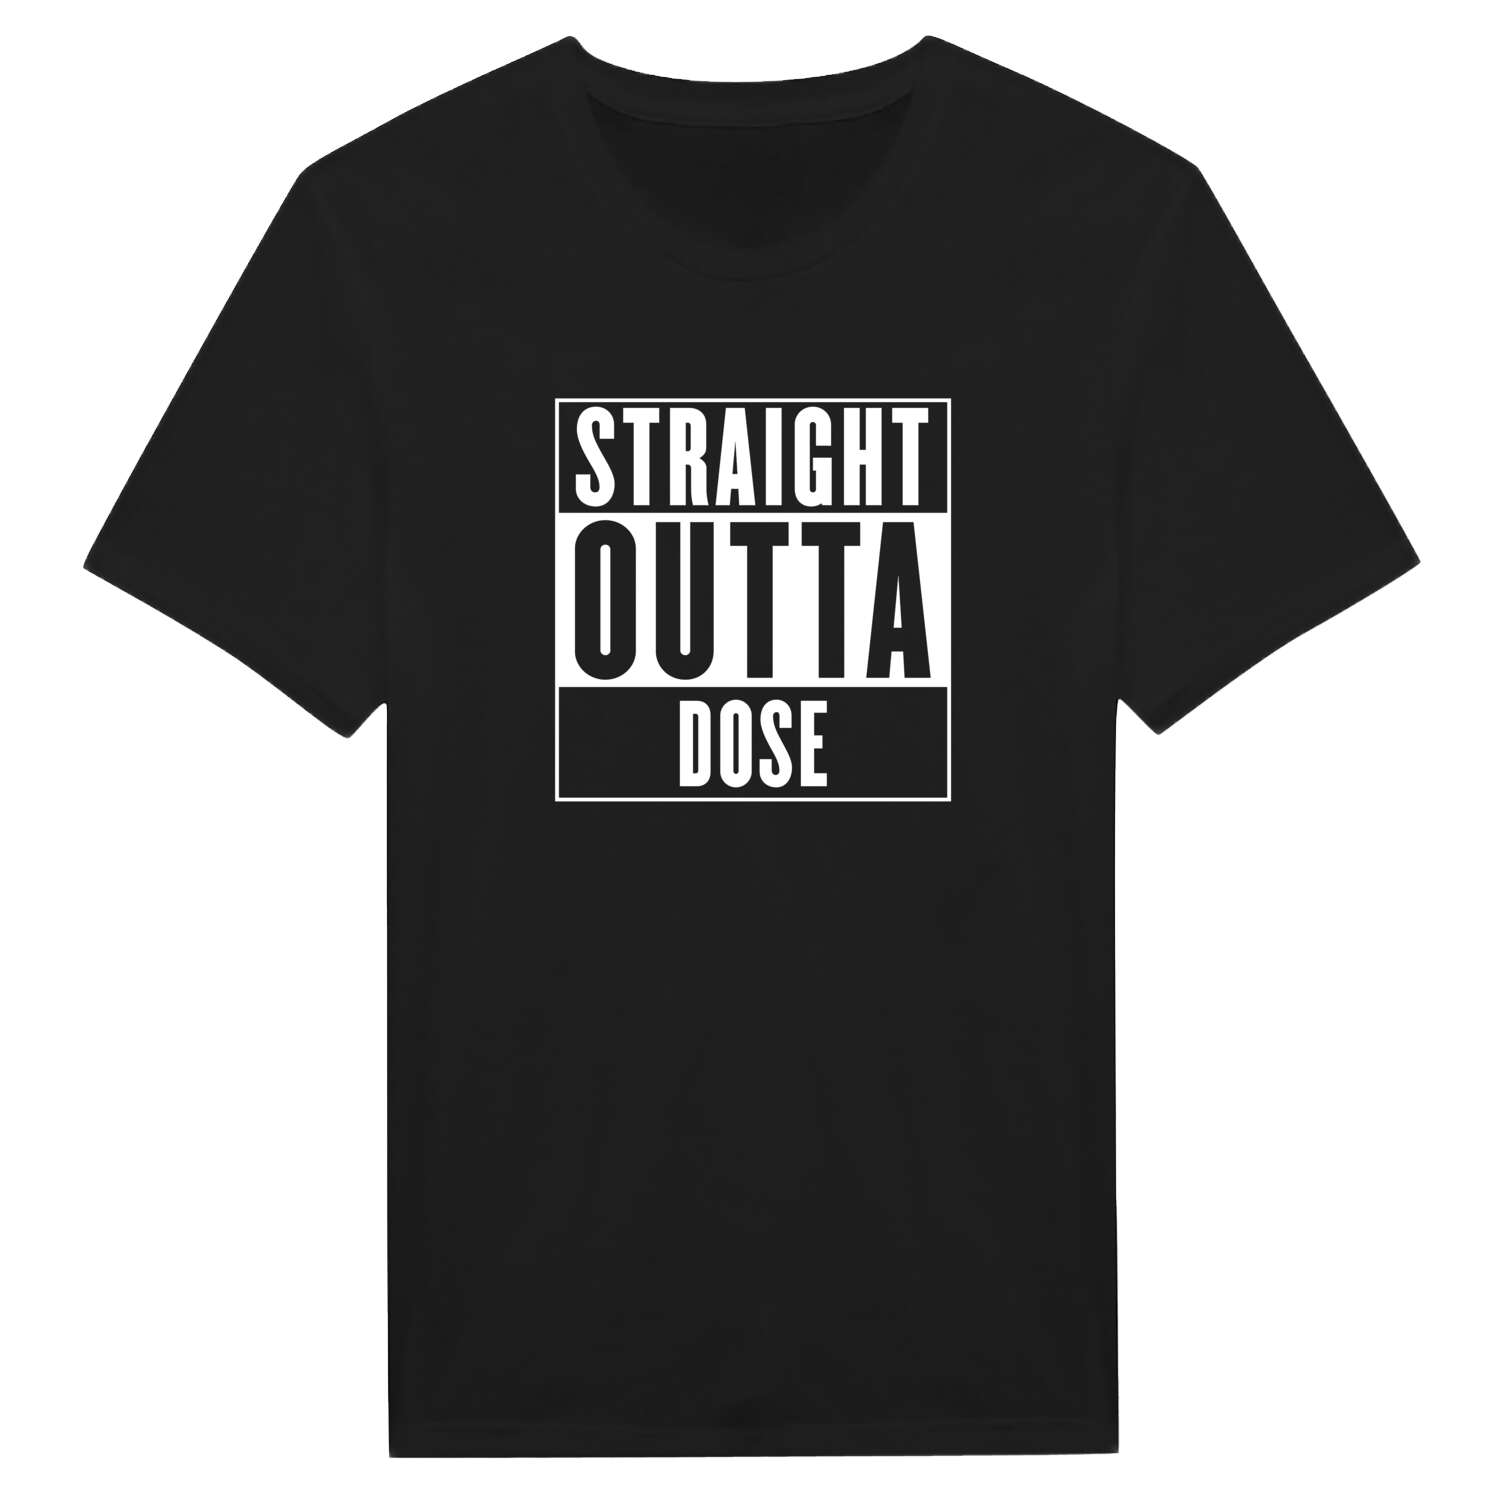 Dose T-Shirt »Straight Outta«